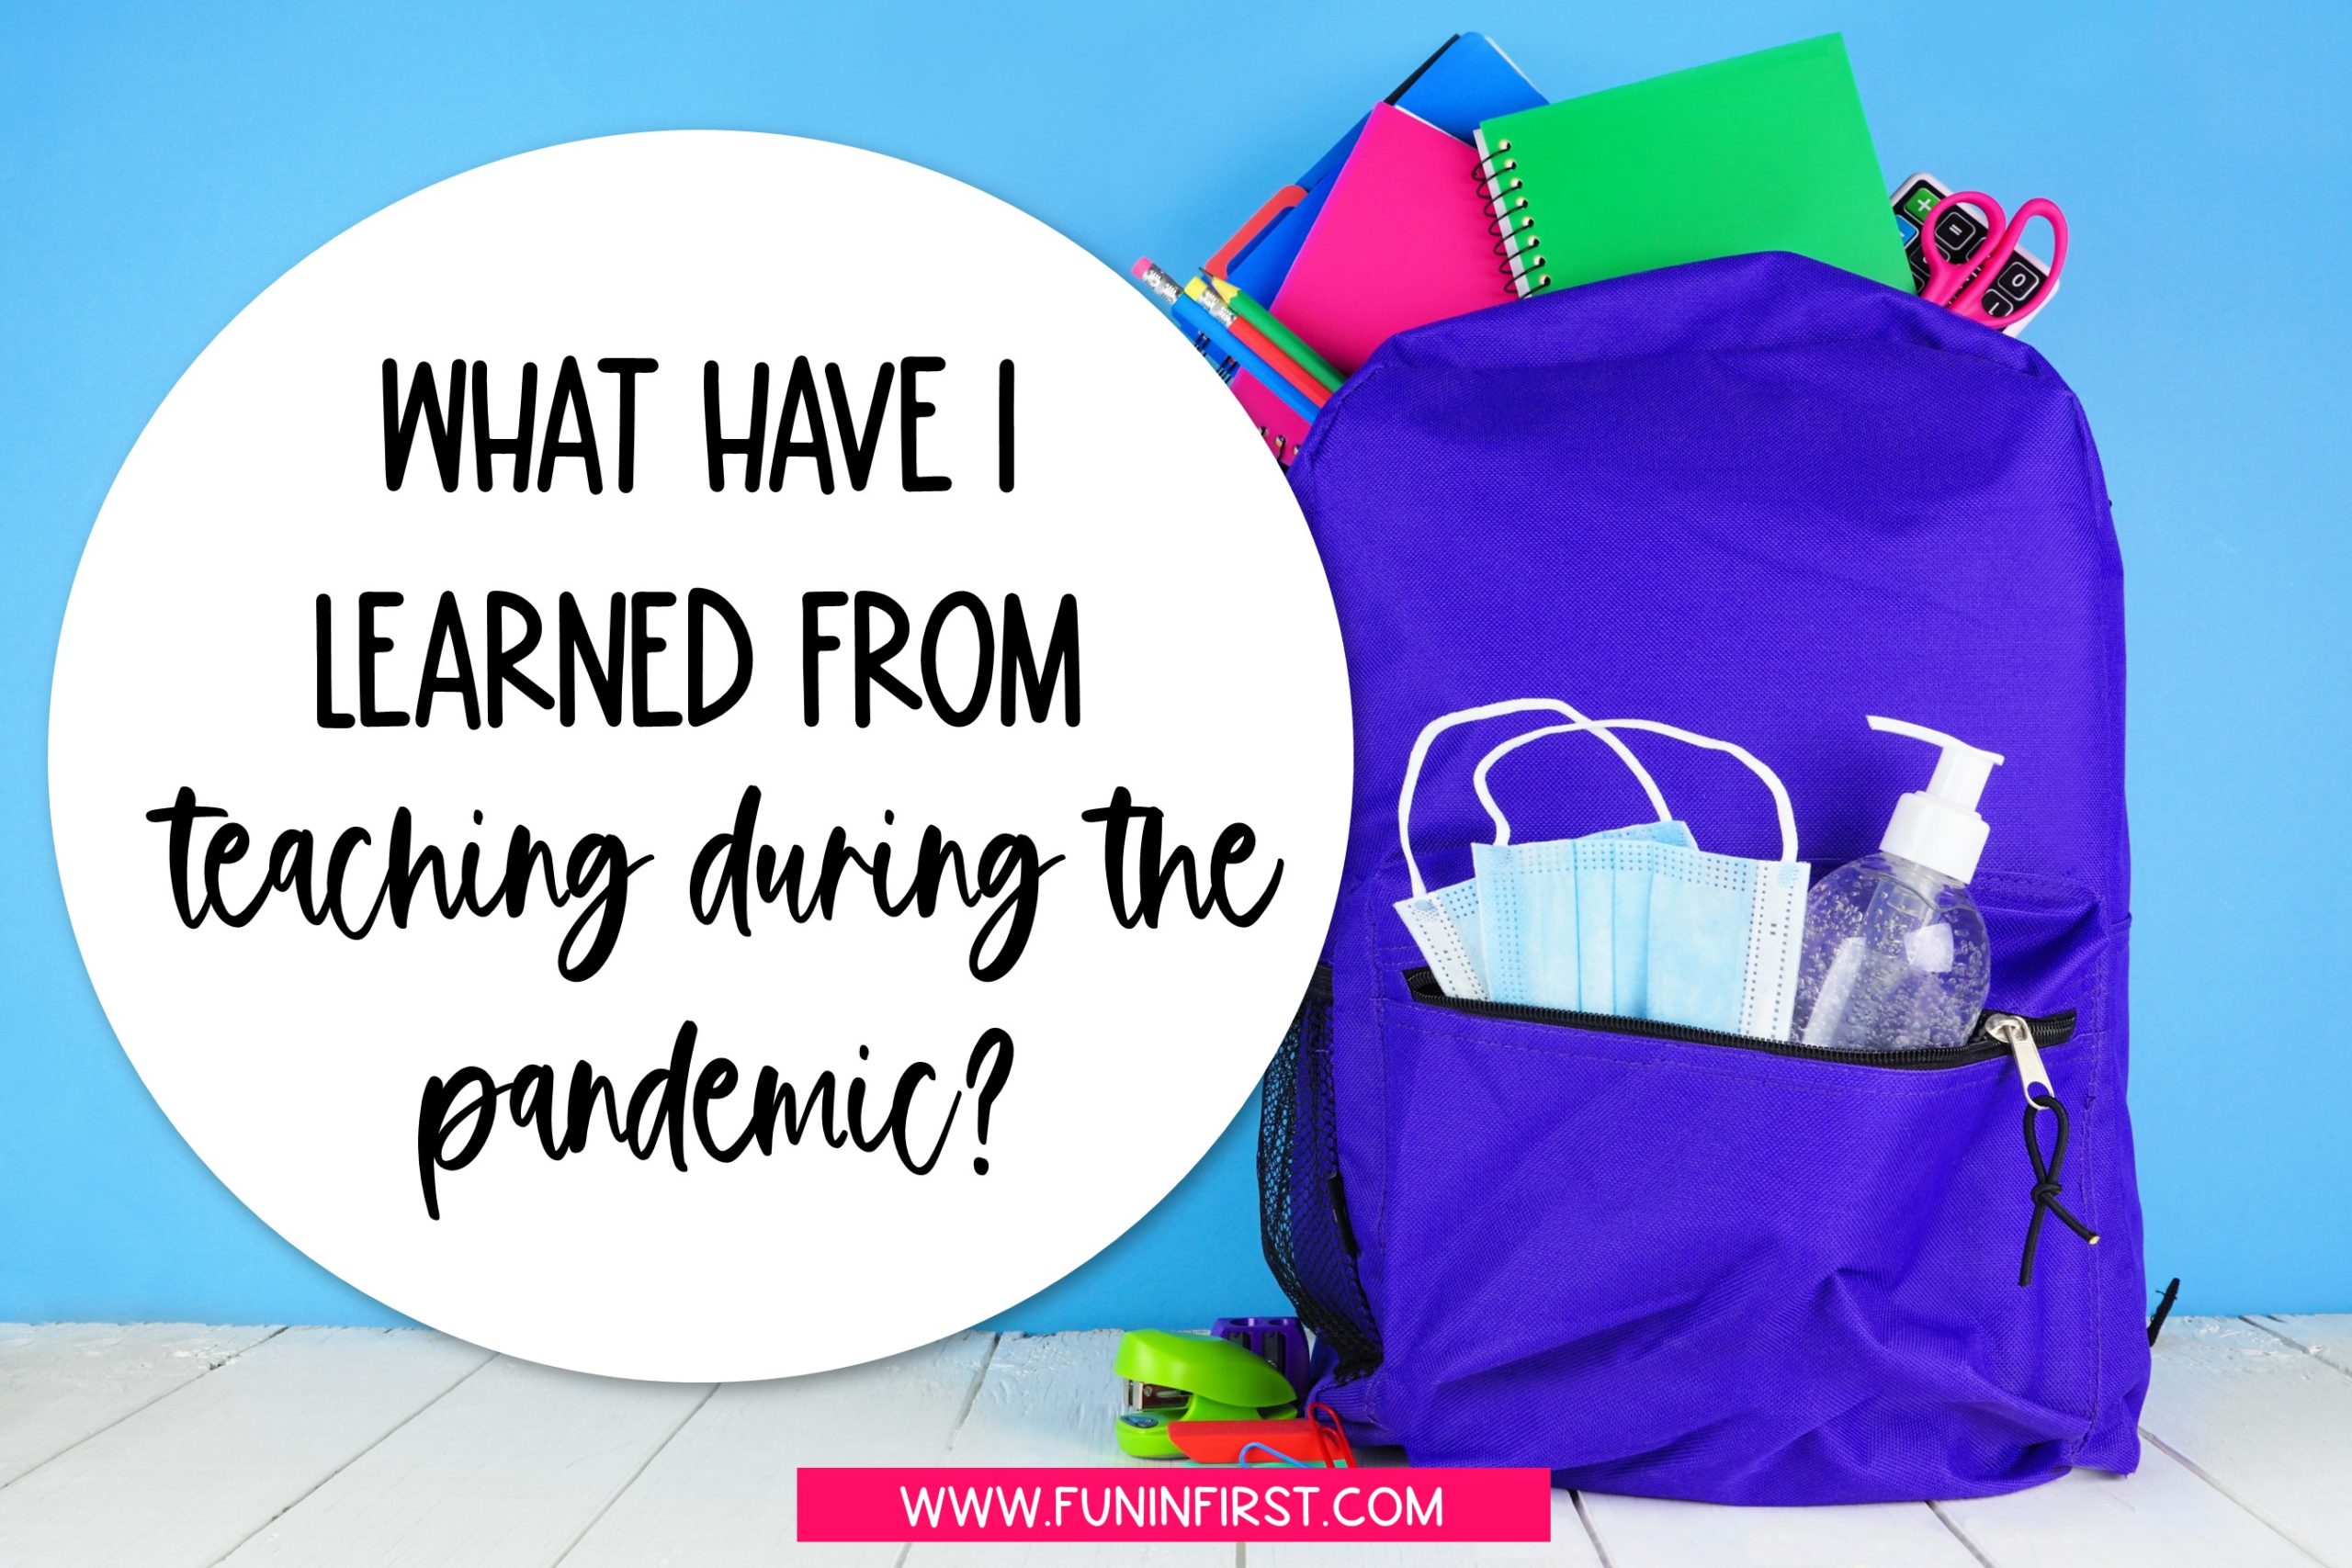 What Has Teaching During a Pandemic Taught Me?